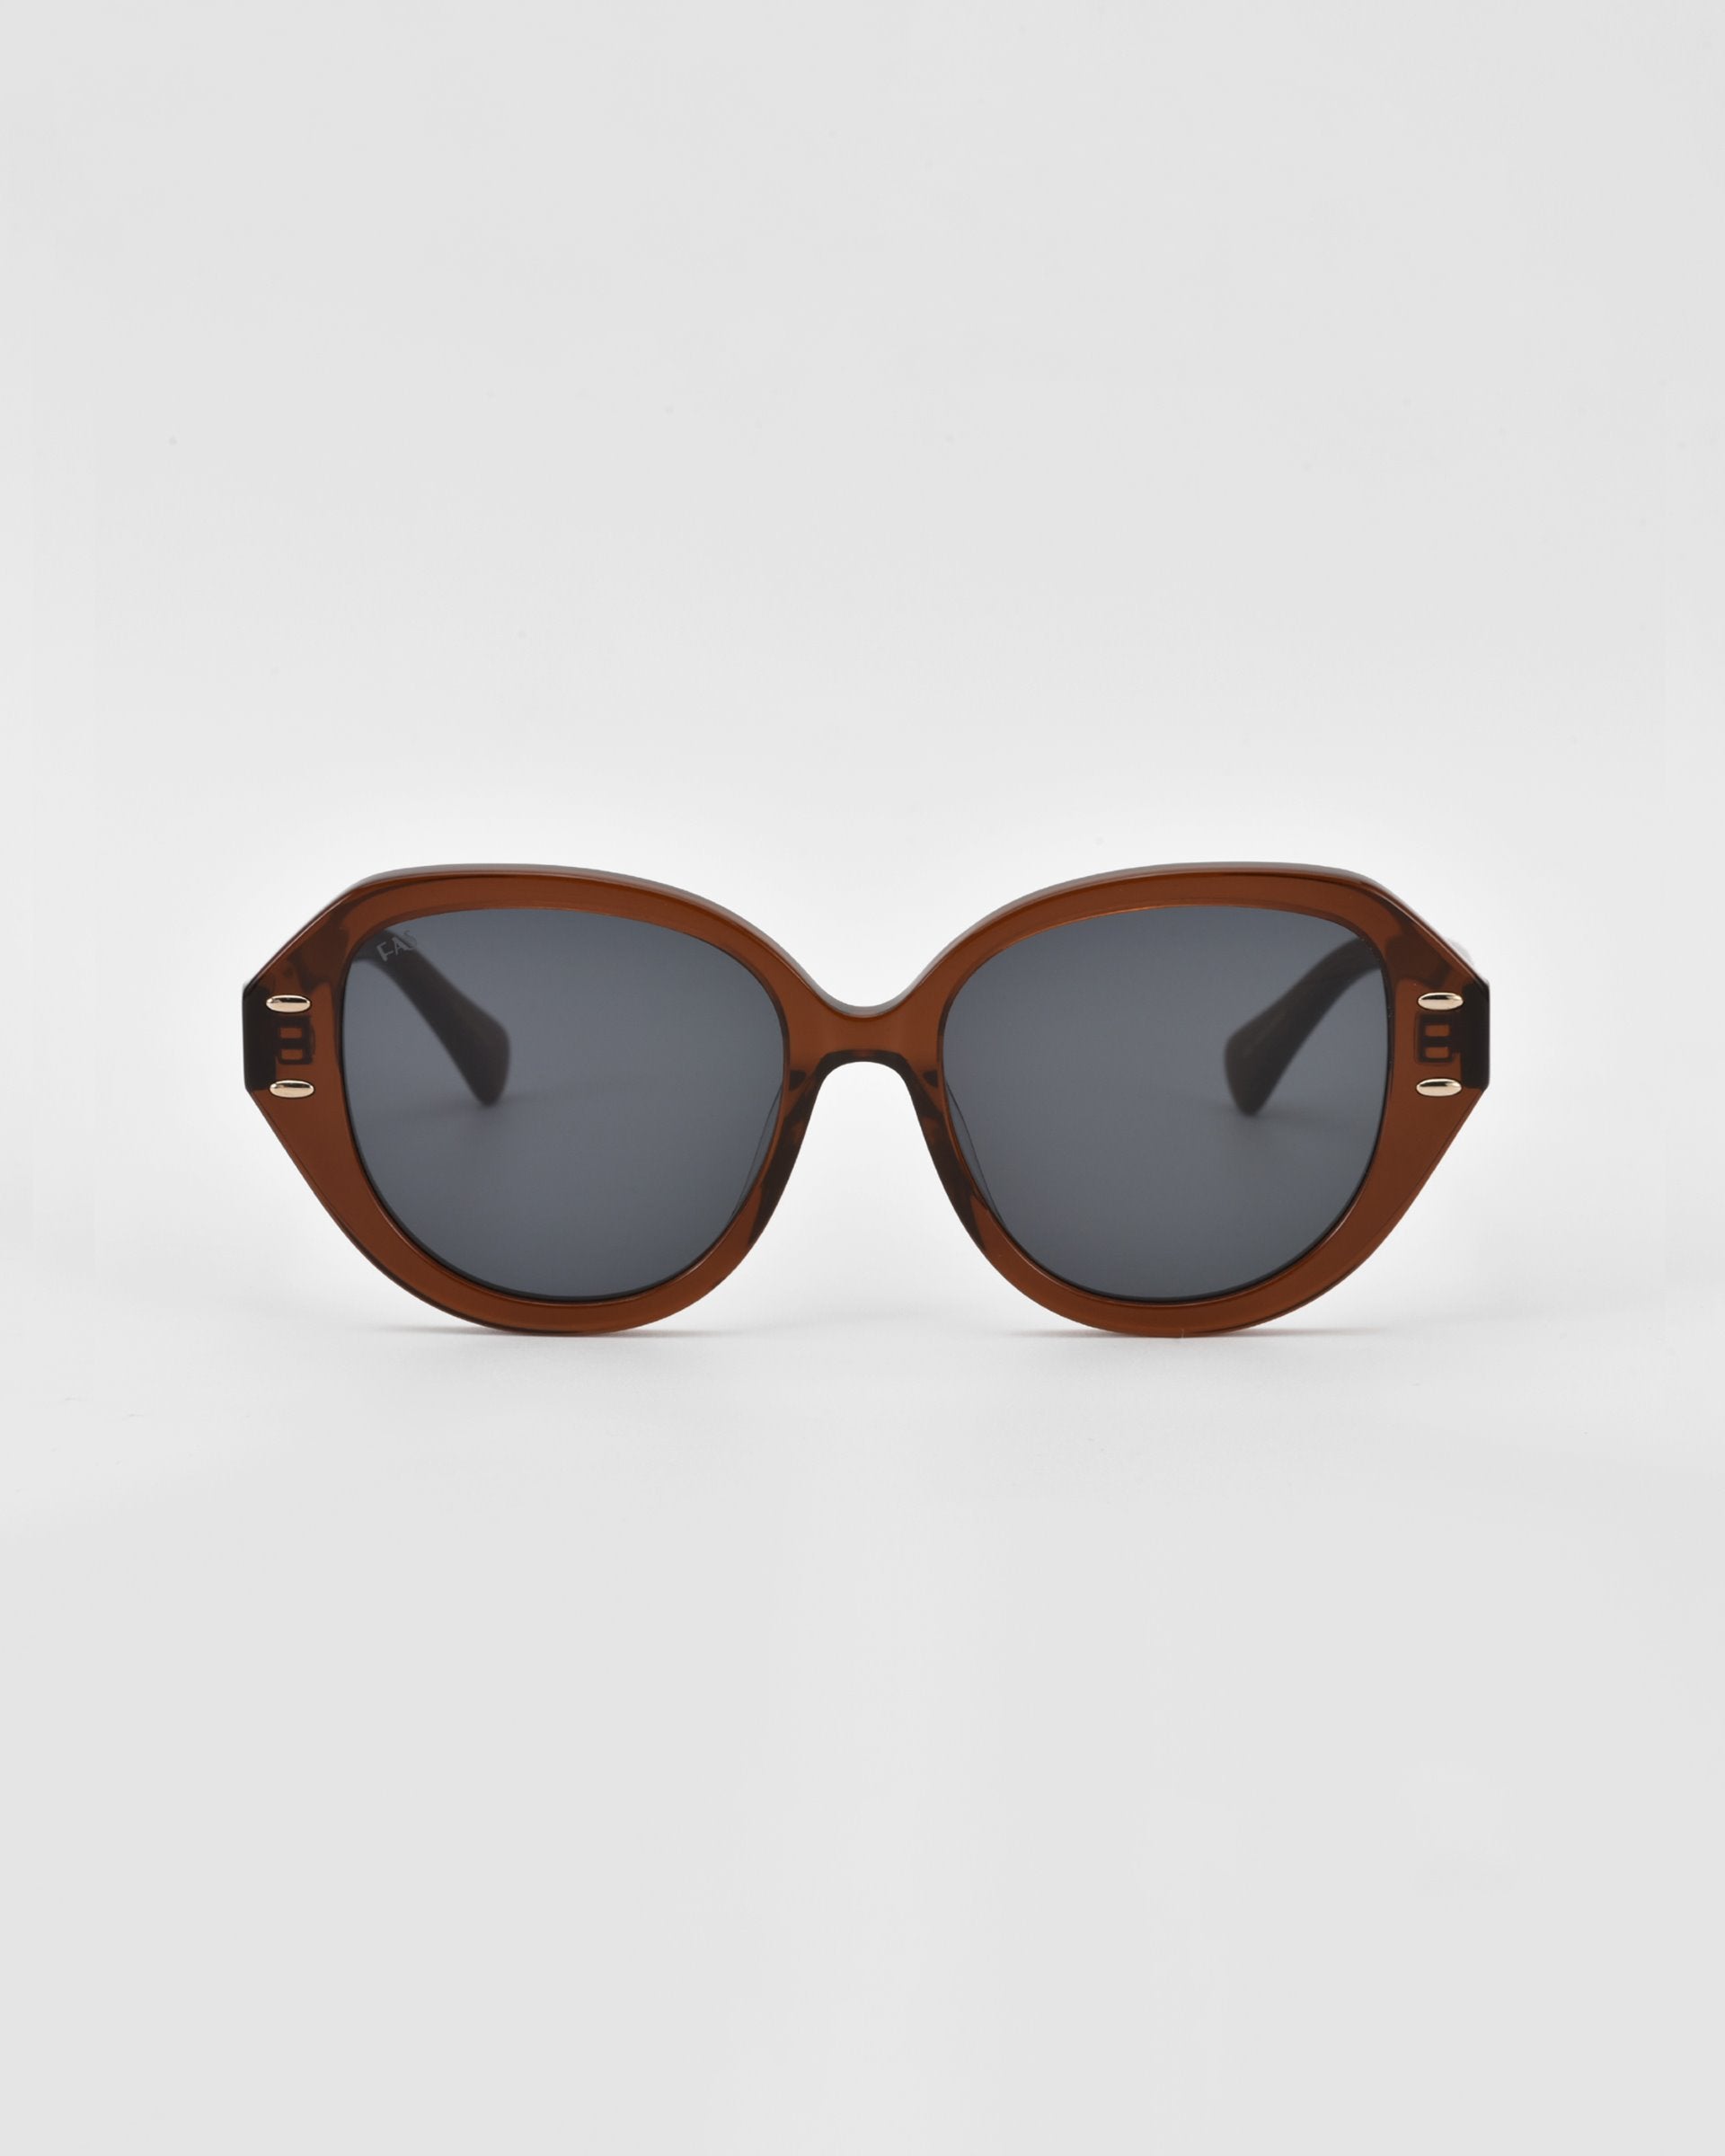 A pair of oversized, round, brown-framed Mirage sunglasses by For Art&#39;s Sake® with dark-tinted lenses. The frame, made from plant-based acetate, features a glossy finish. The Mirage sunglasses are set against a plain white background.